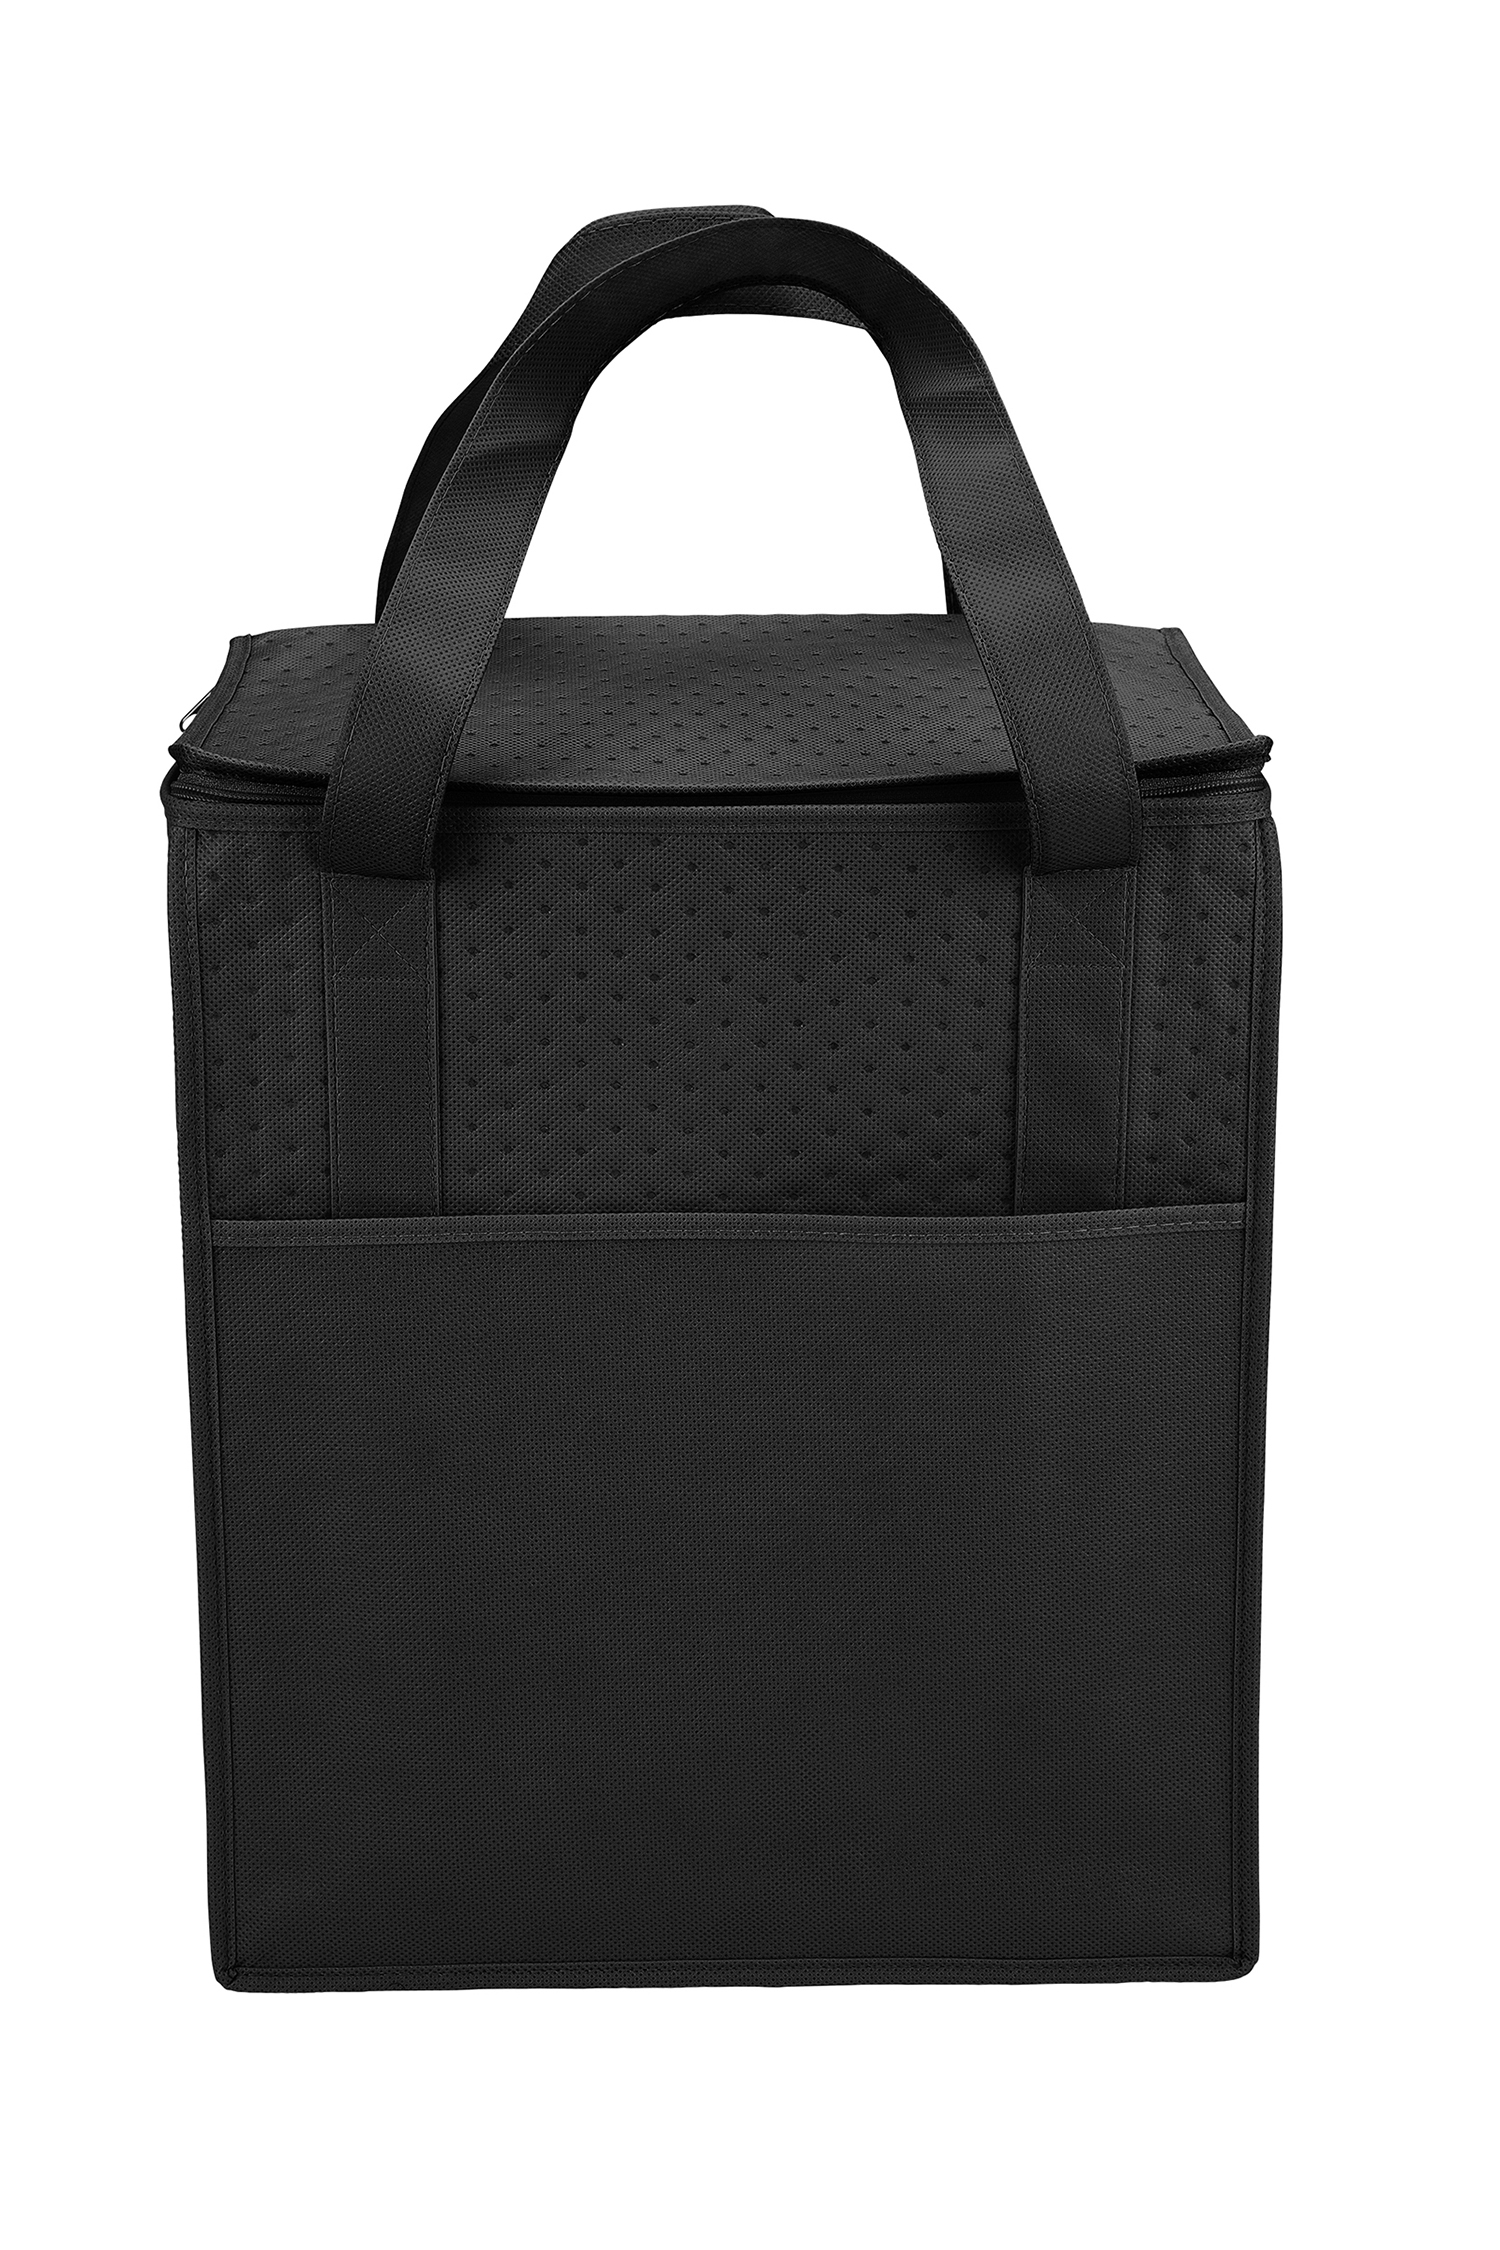 Bag Makers CVACS1315 - Custom Printed Eco-Friendly Insulated Promotional Non-Woven Tote Bag